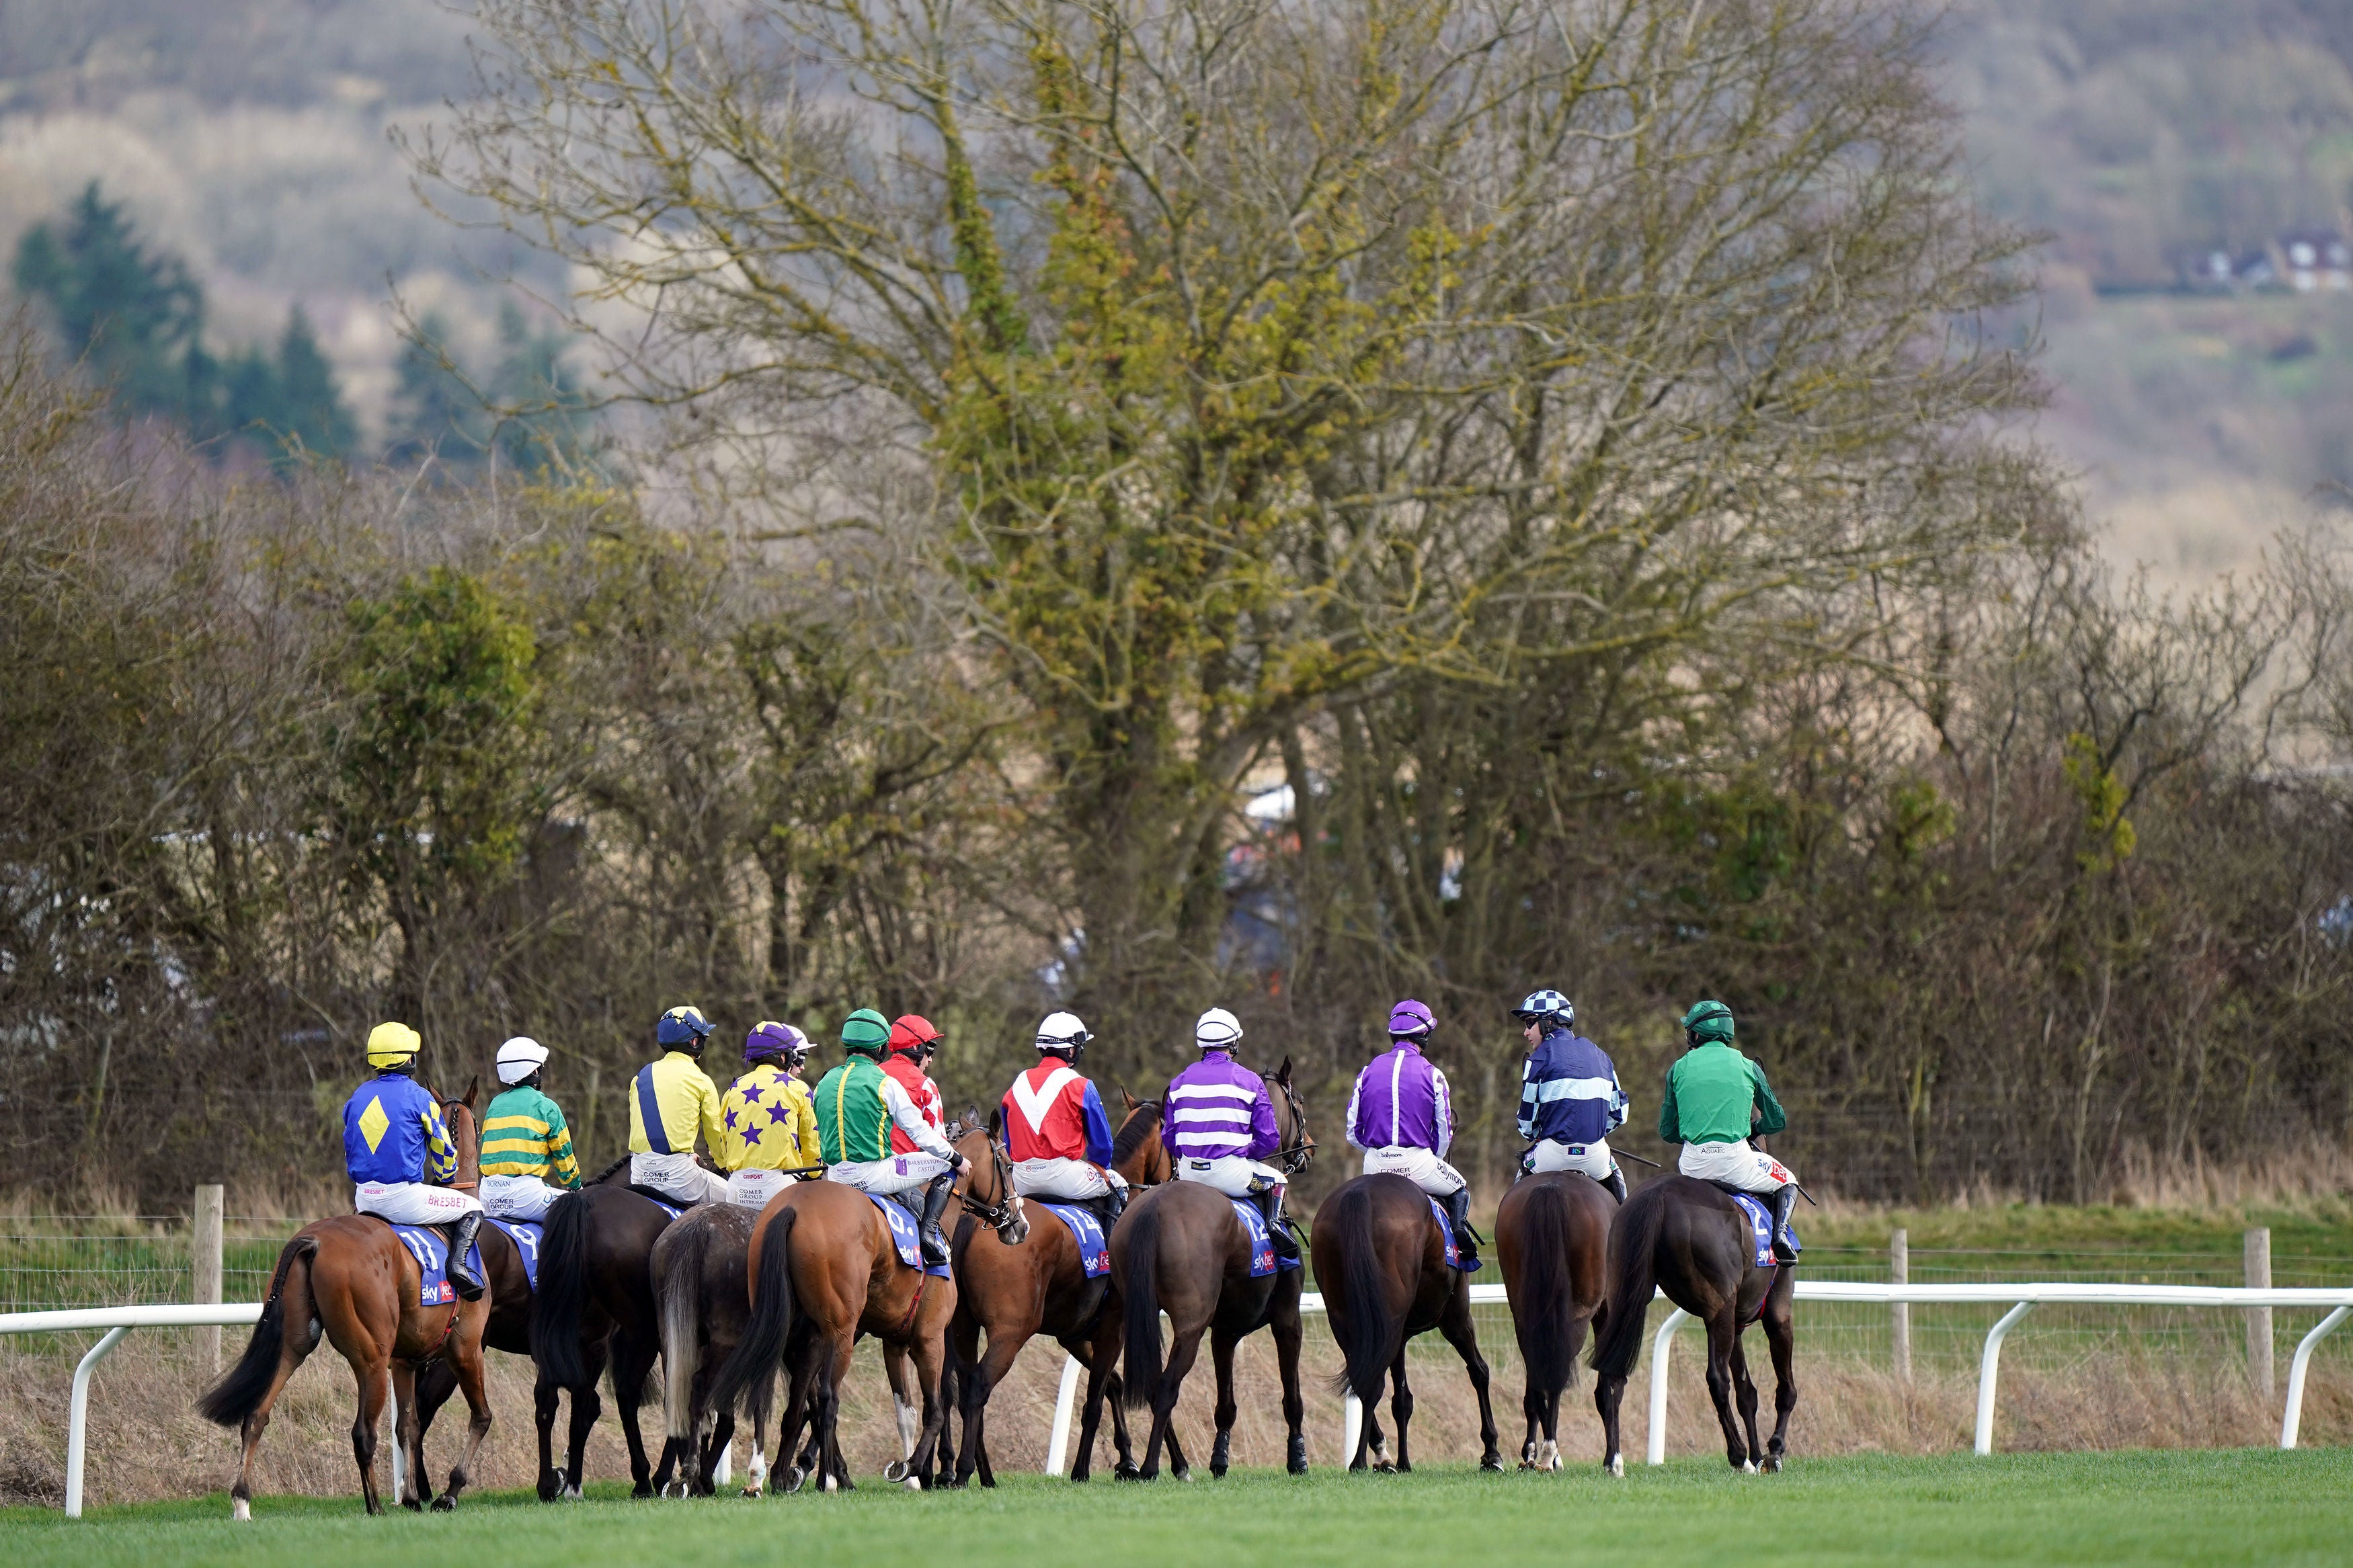 At least one horse has died at the Cheltenham Festival every year it has been held since 2000